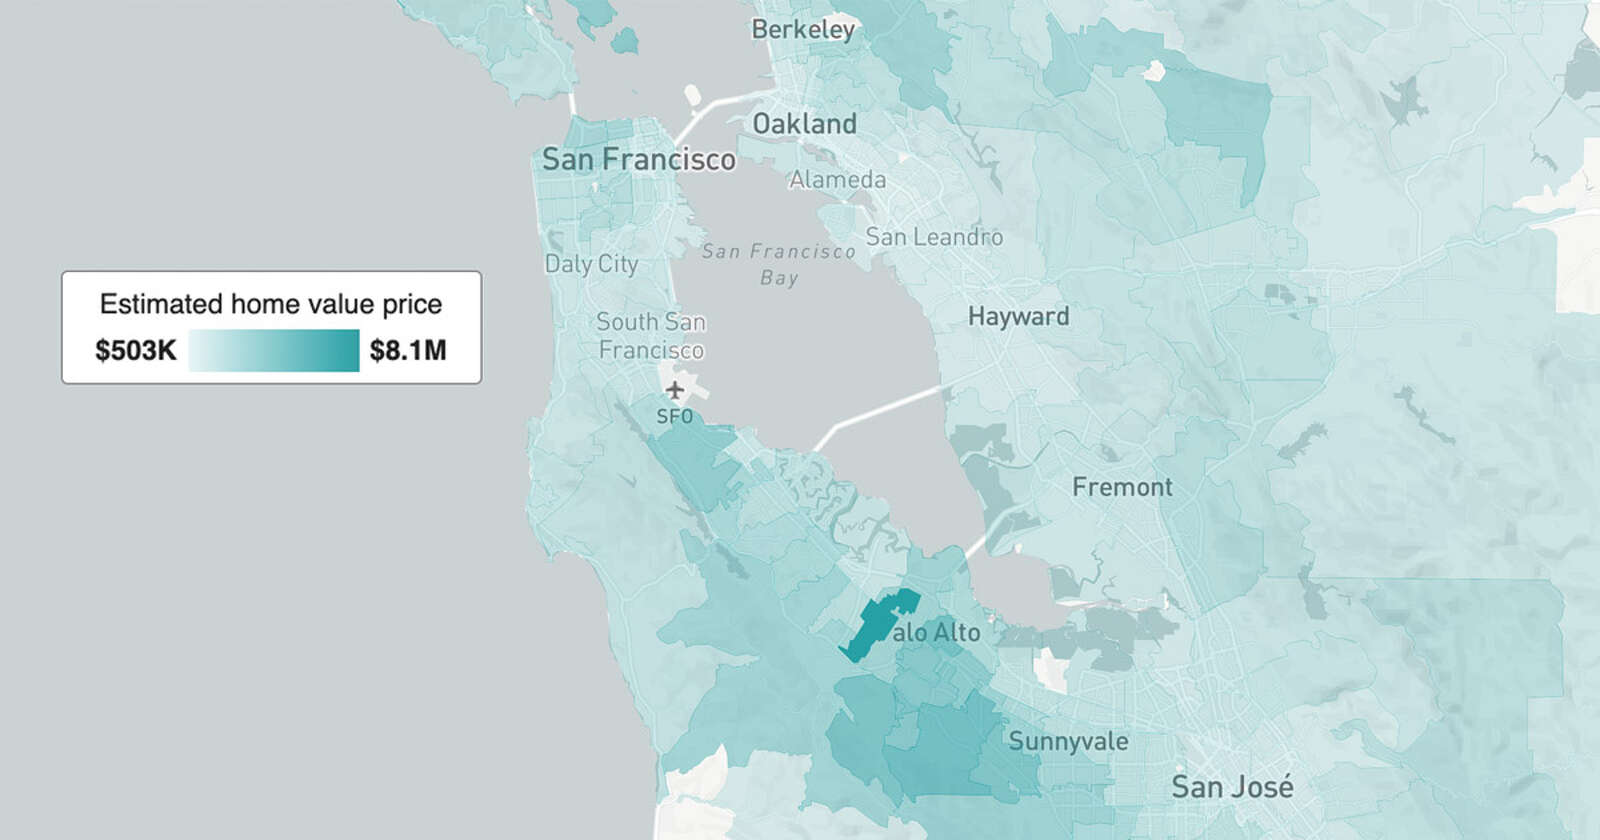 Bay Area home prices in every city and ZIP code